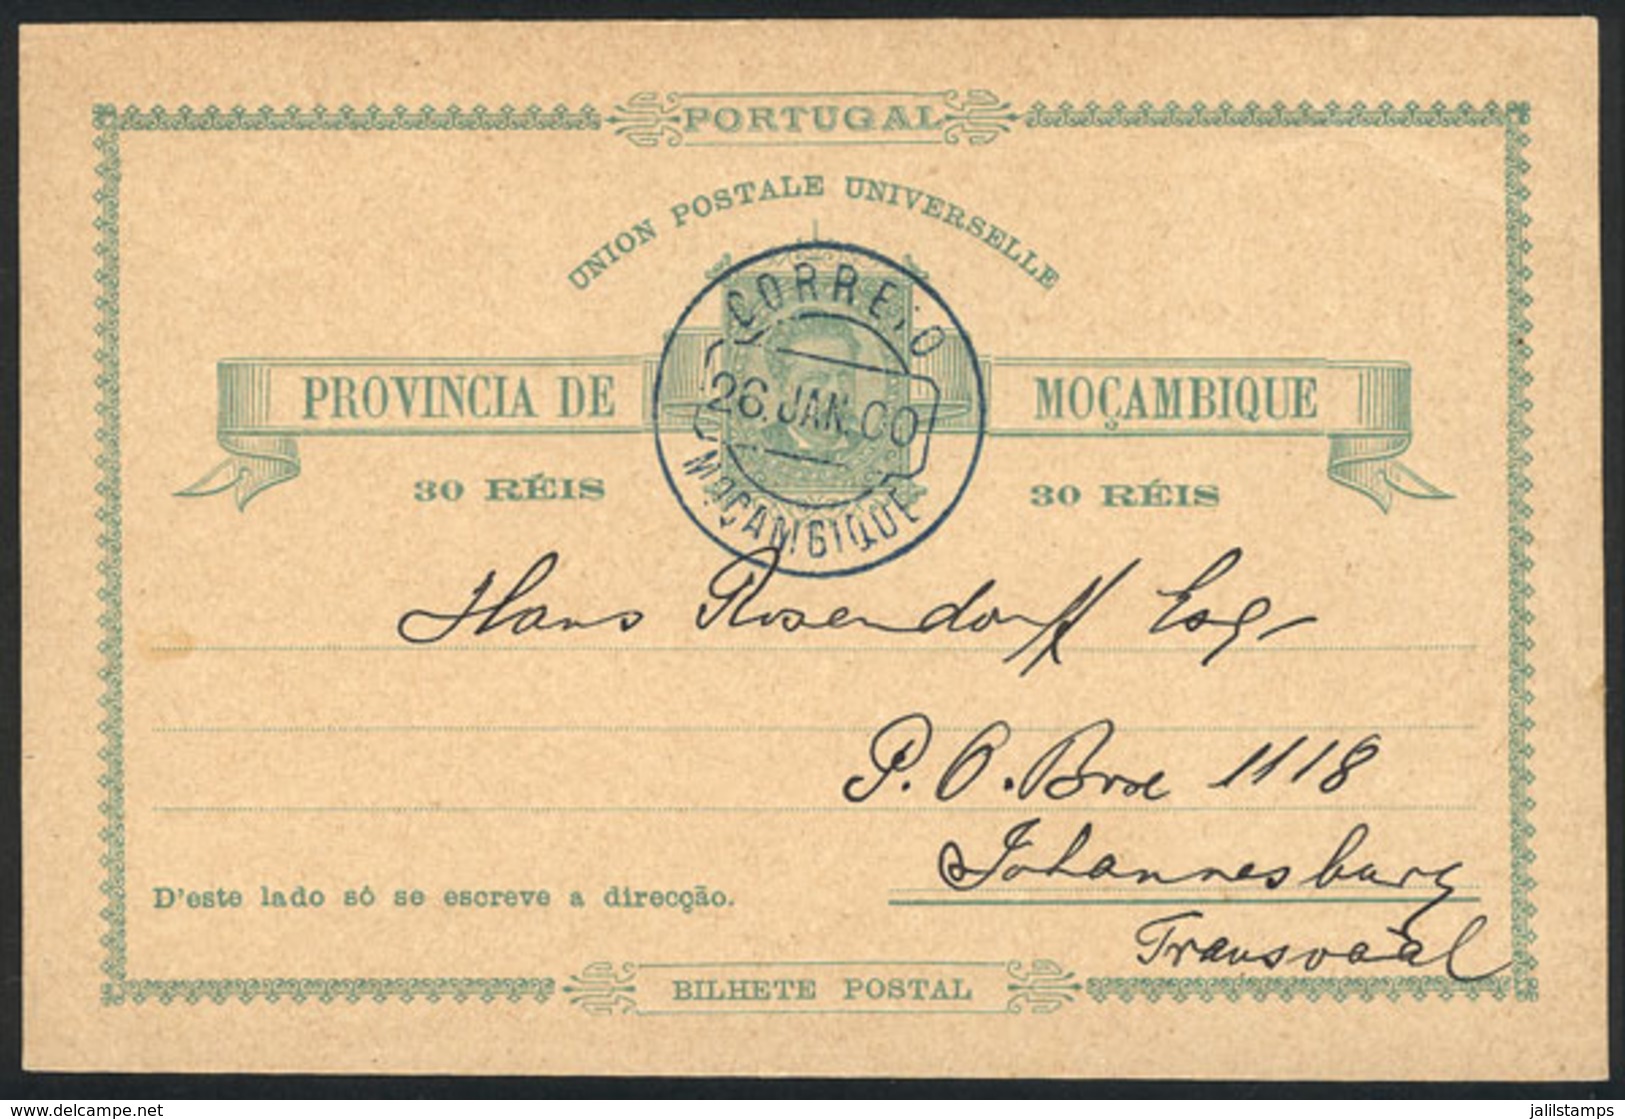 MOZAMBIQUE: 30Rs. Postal Card Sent From Mozambique To Johannesburg On 26/JA/1900, Excellent Quality! - Mozambico